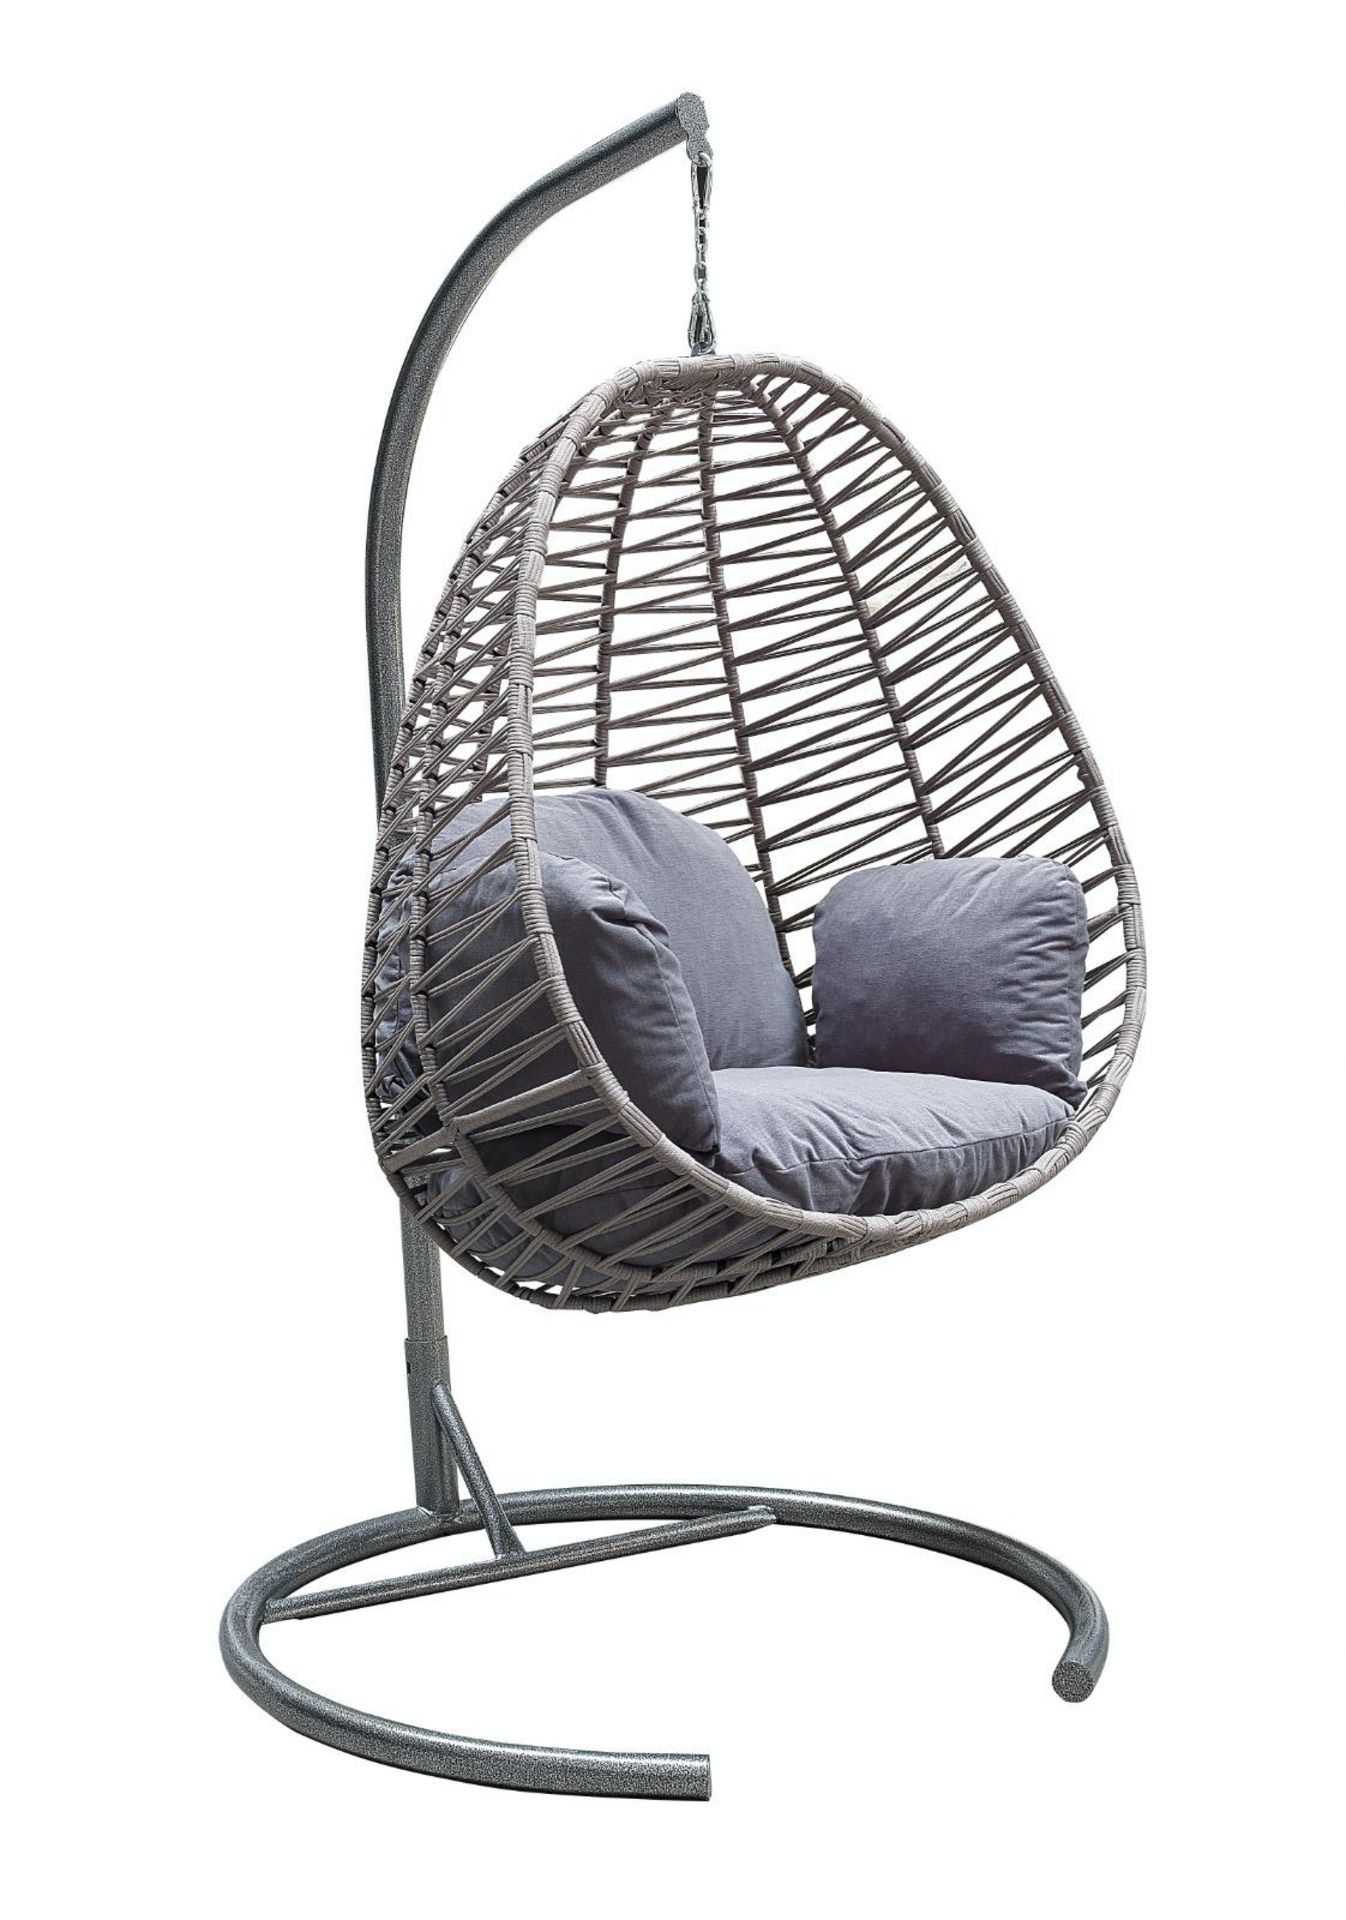 x3 New Light Grey Luxury Weaved Hanging Egg With Cushion (Similar Chairs £250 to £400)